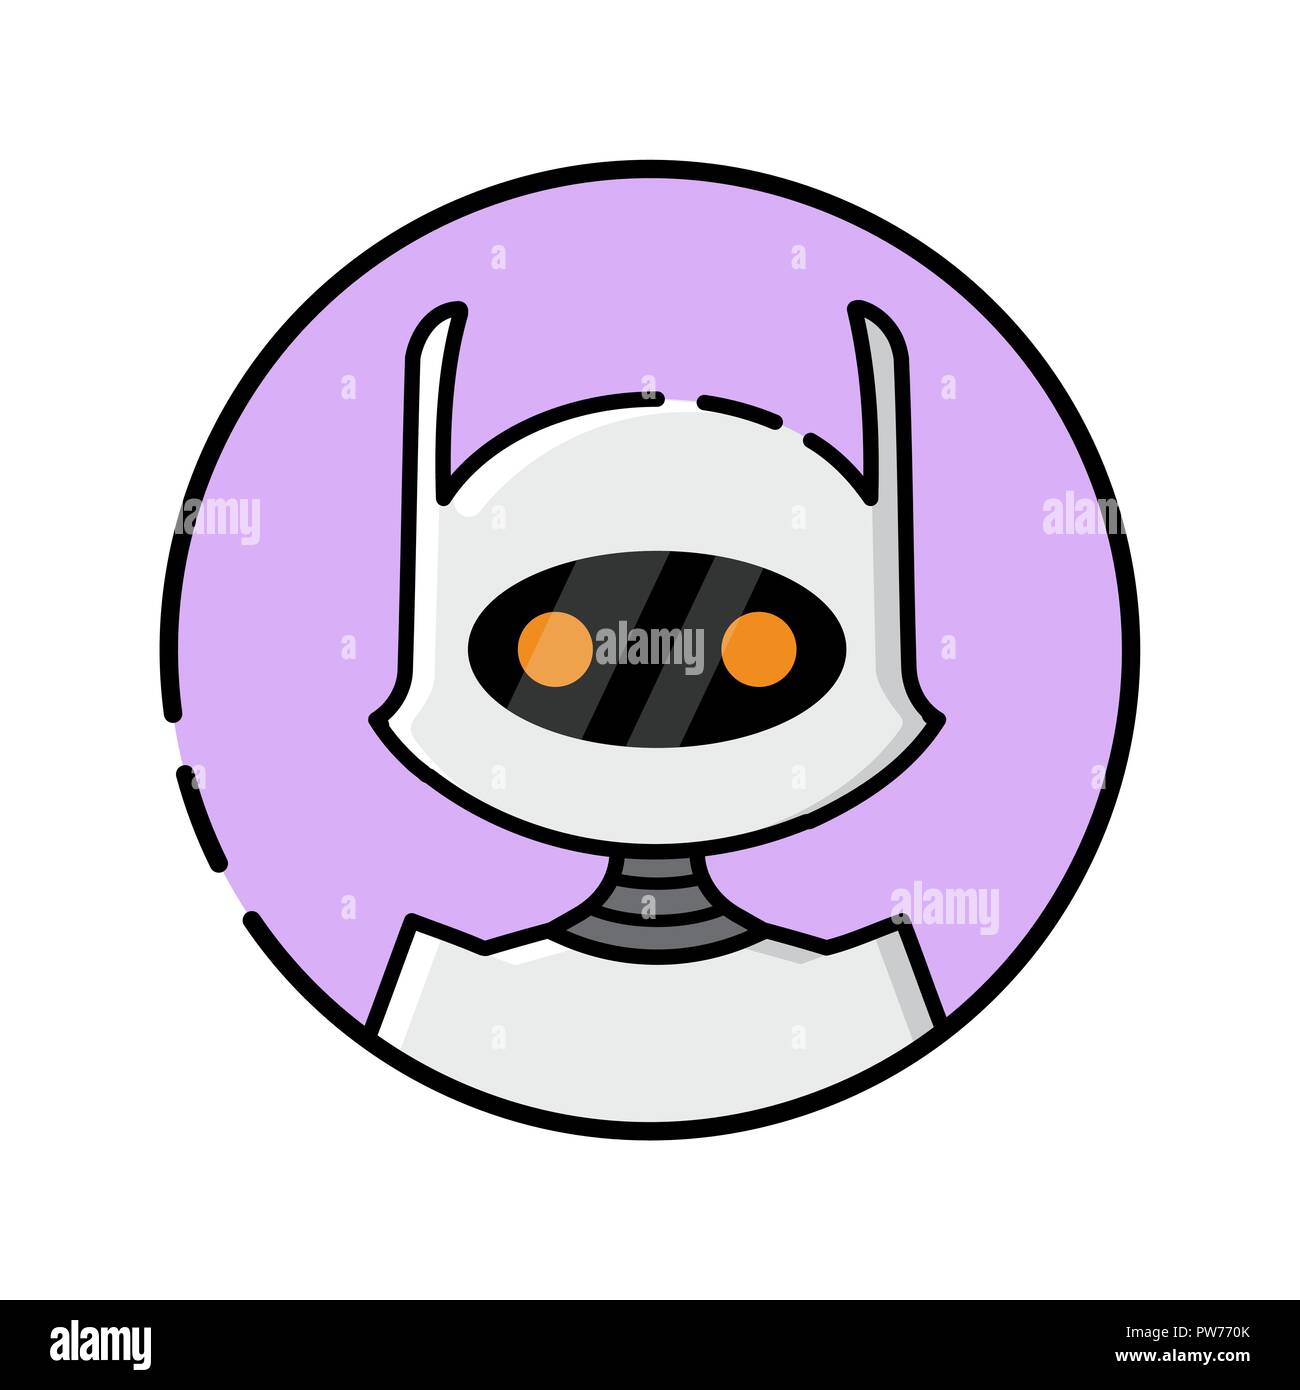 Round robot icon line style on white background Stock Vector